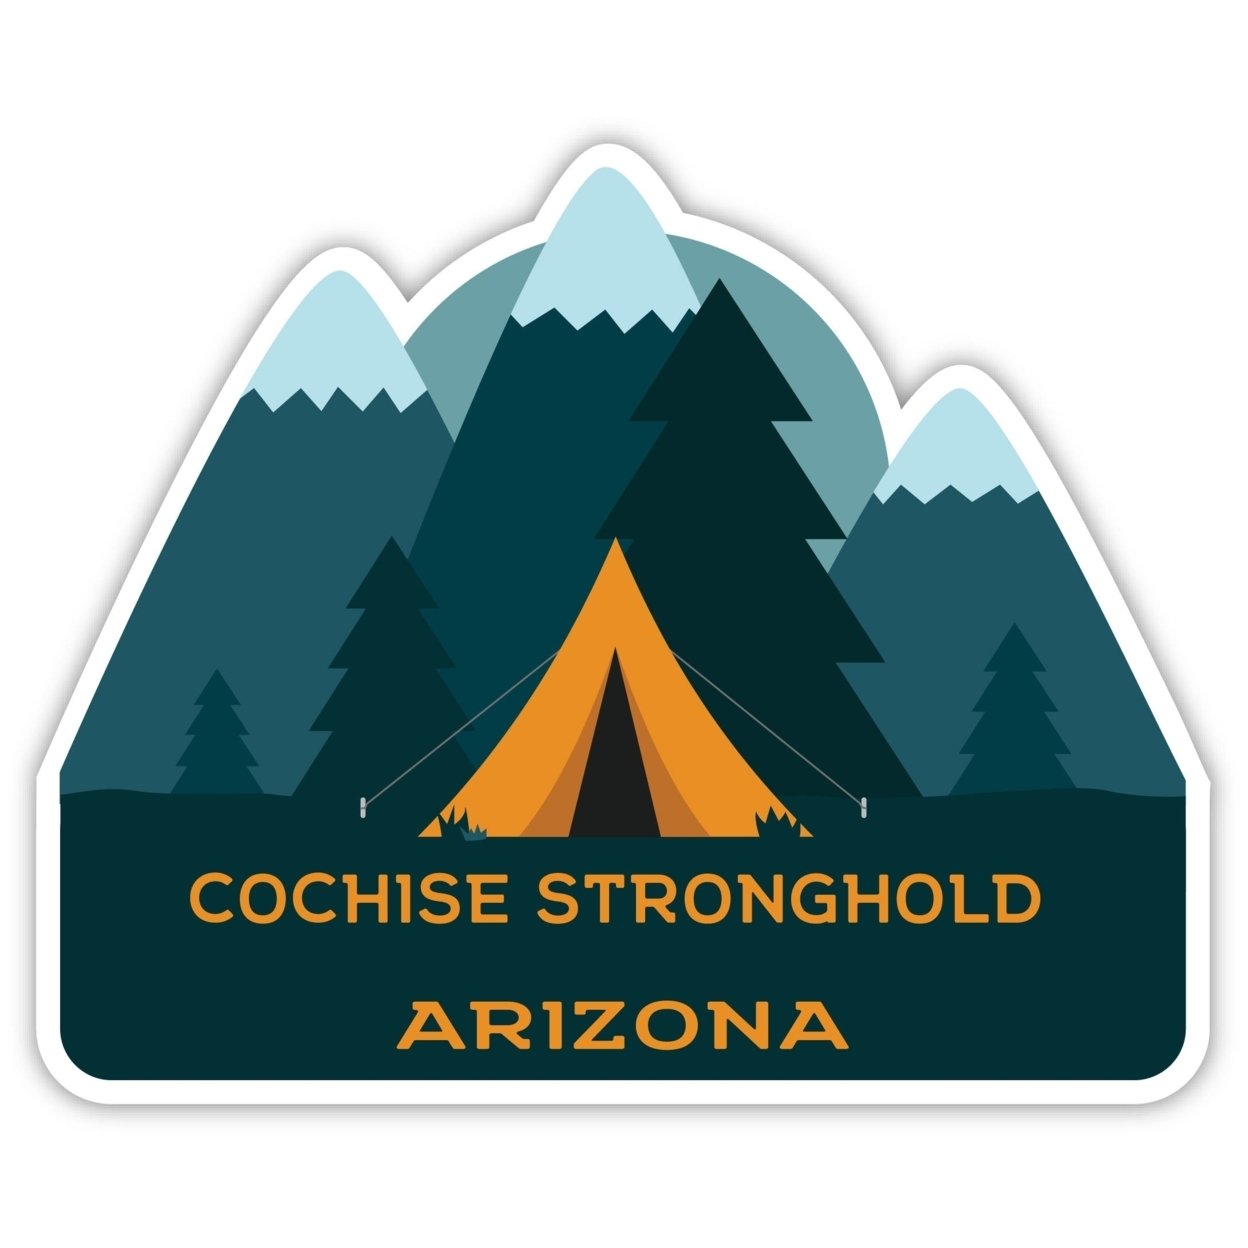 Cochise Stronghold Arizona Souvenir Decorative Stickers (Choose Theme And Size) - 4-Pack, 8-Inch, Tent